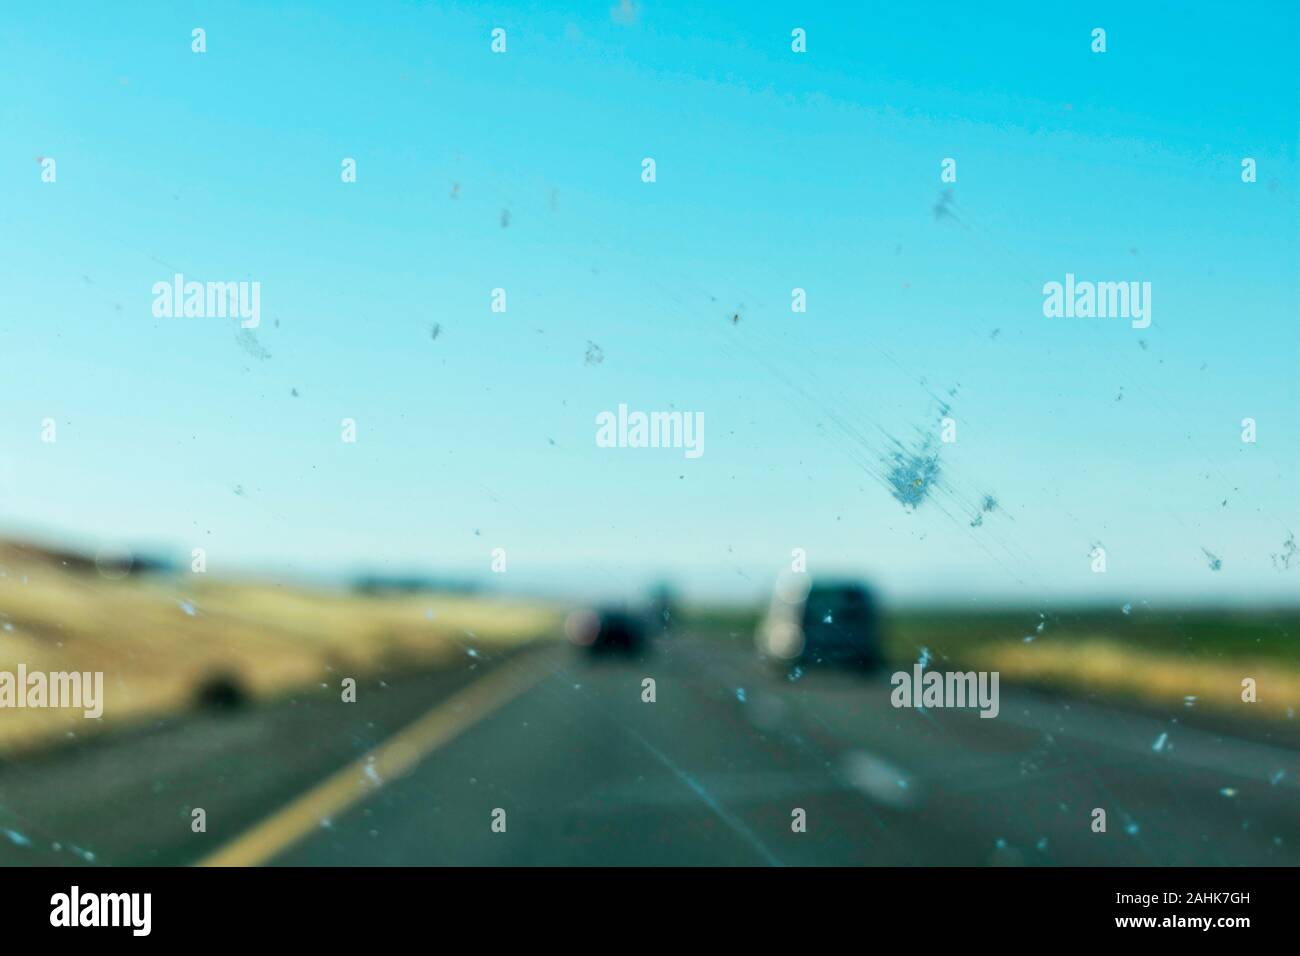 Dirty car window glass with insects and dirt affect driver visibility while driving on divided highway. The worn out or bad car wiper blades. Stock Photo